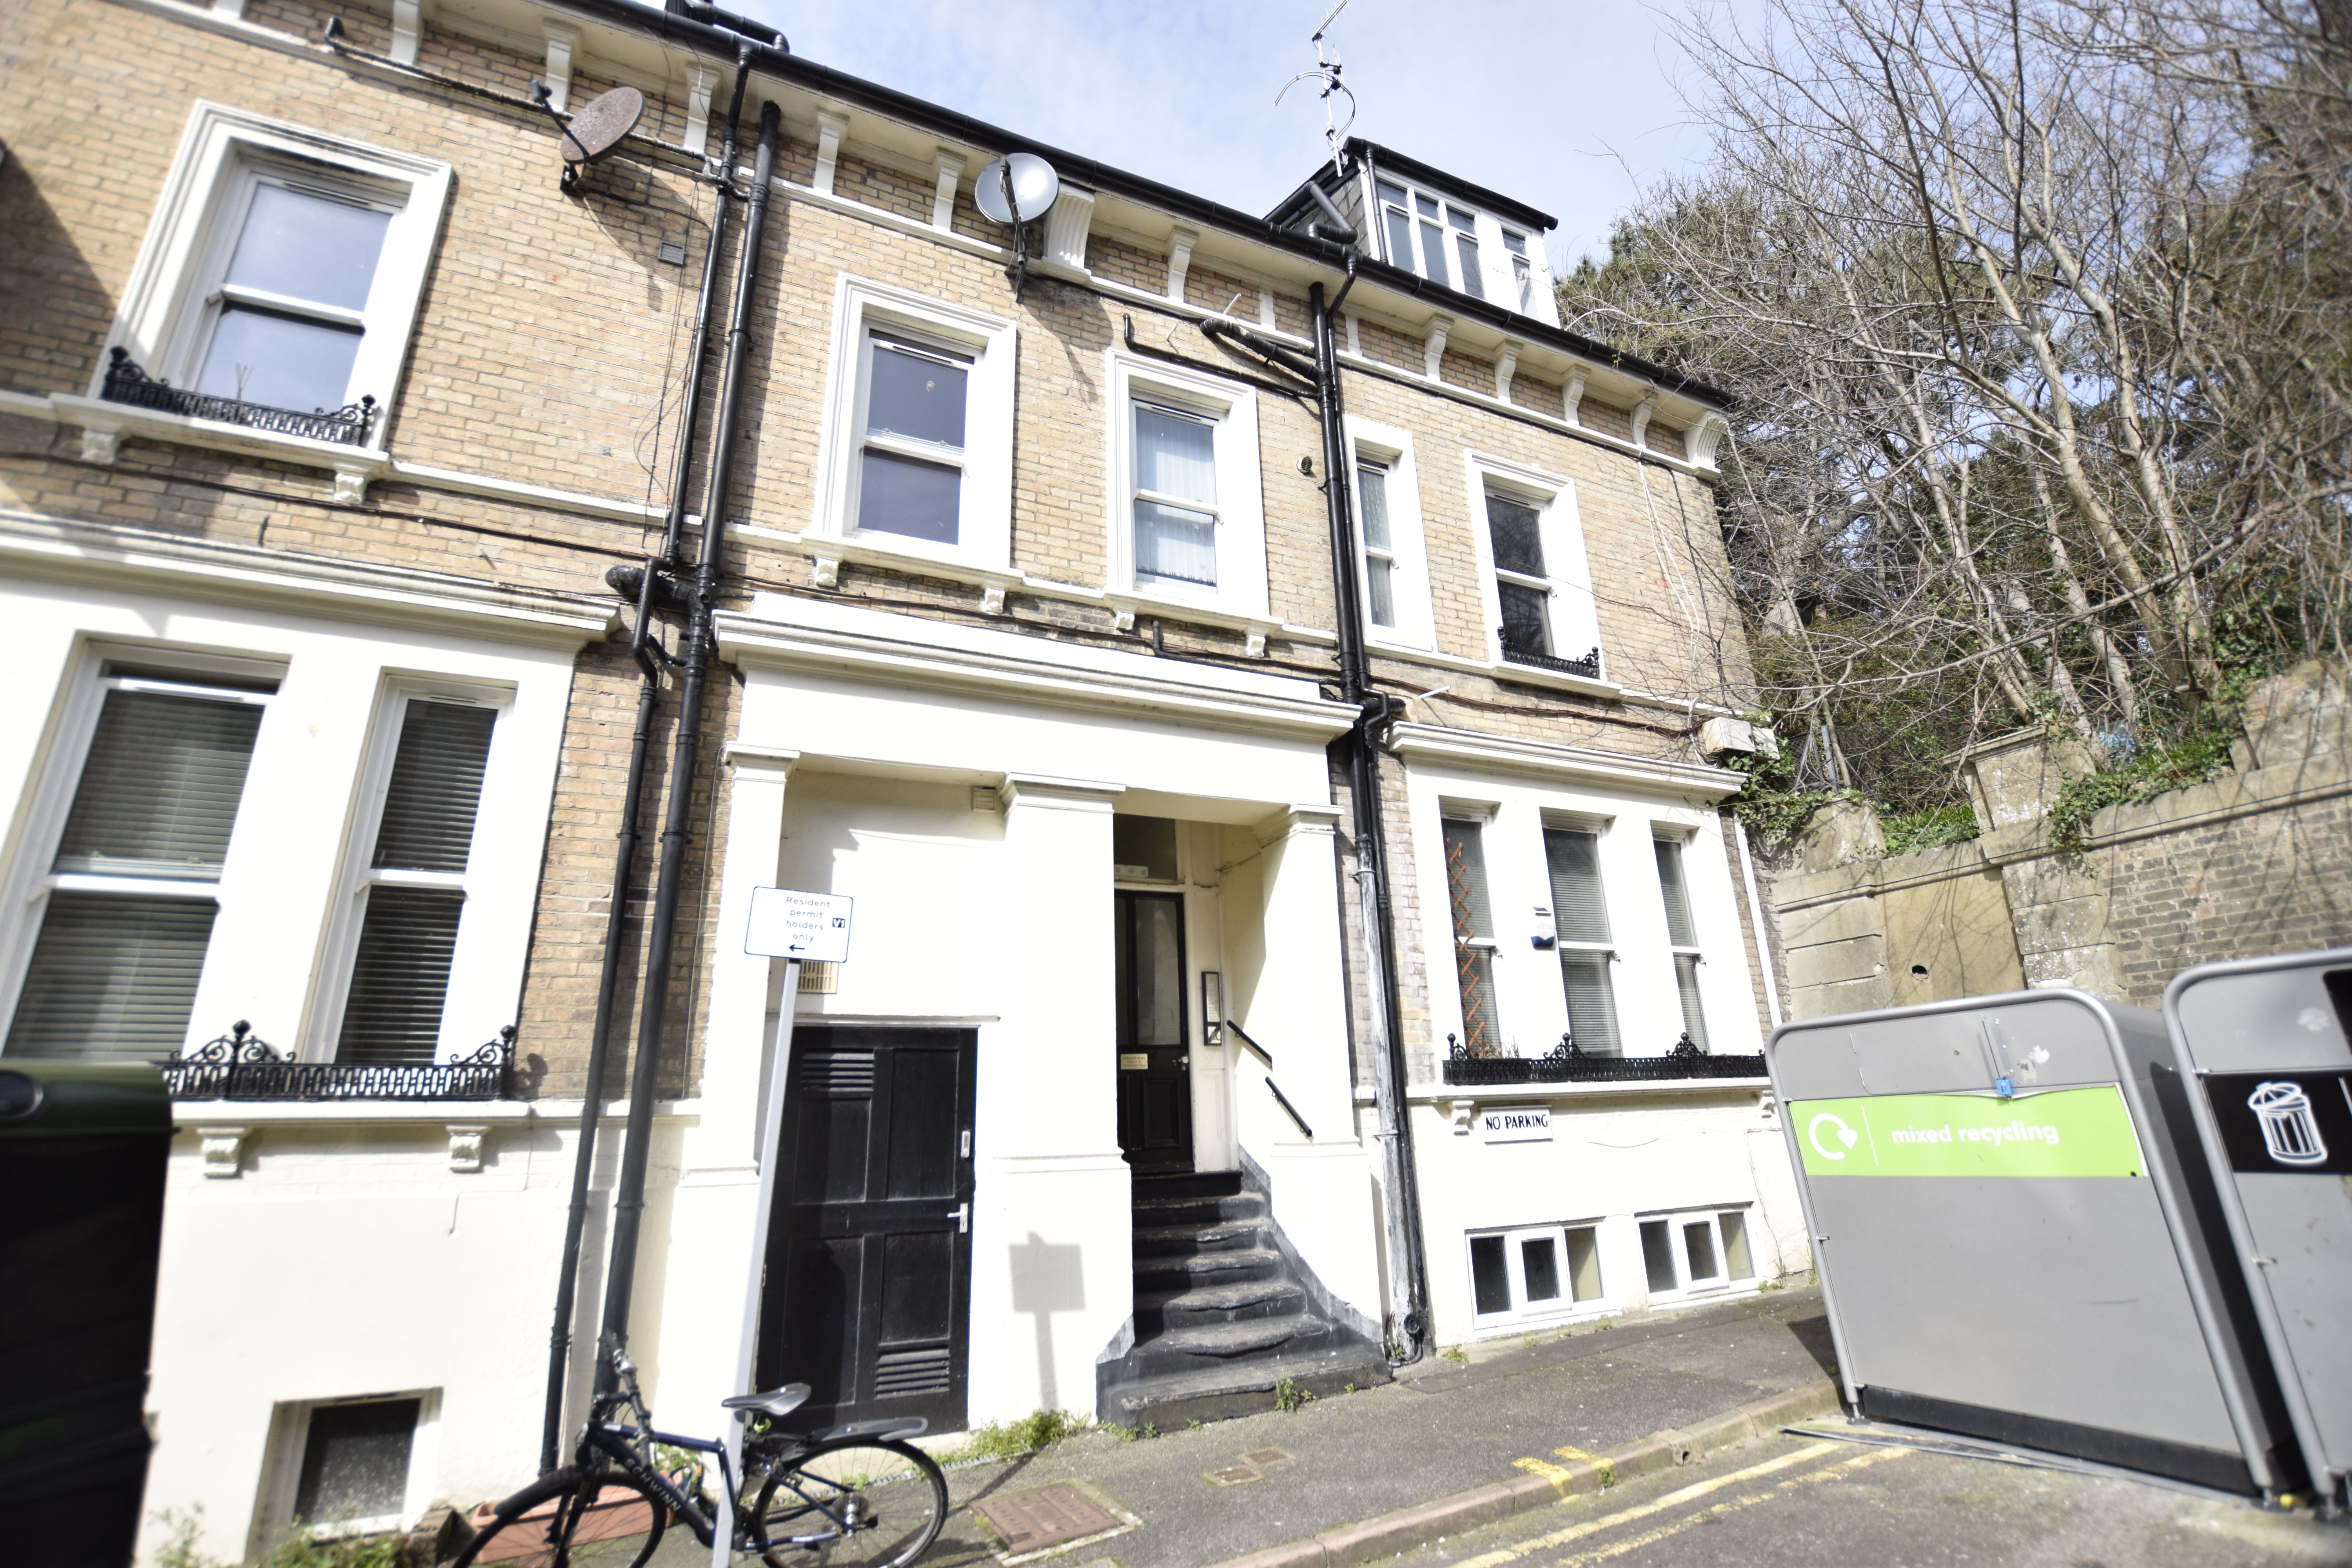 ATTENTION INVESTORS...This property requires extensive refurbishment, and would make an ideal holiday let or residential lettings property in Bournemouth Town Centre...